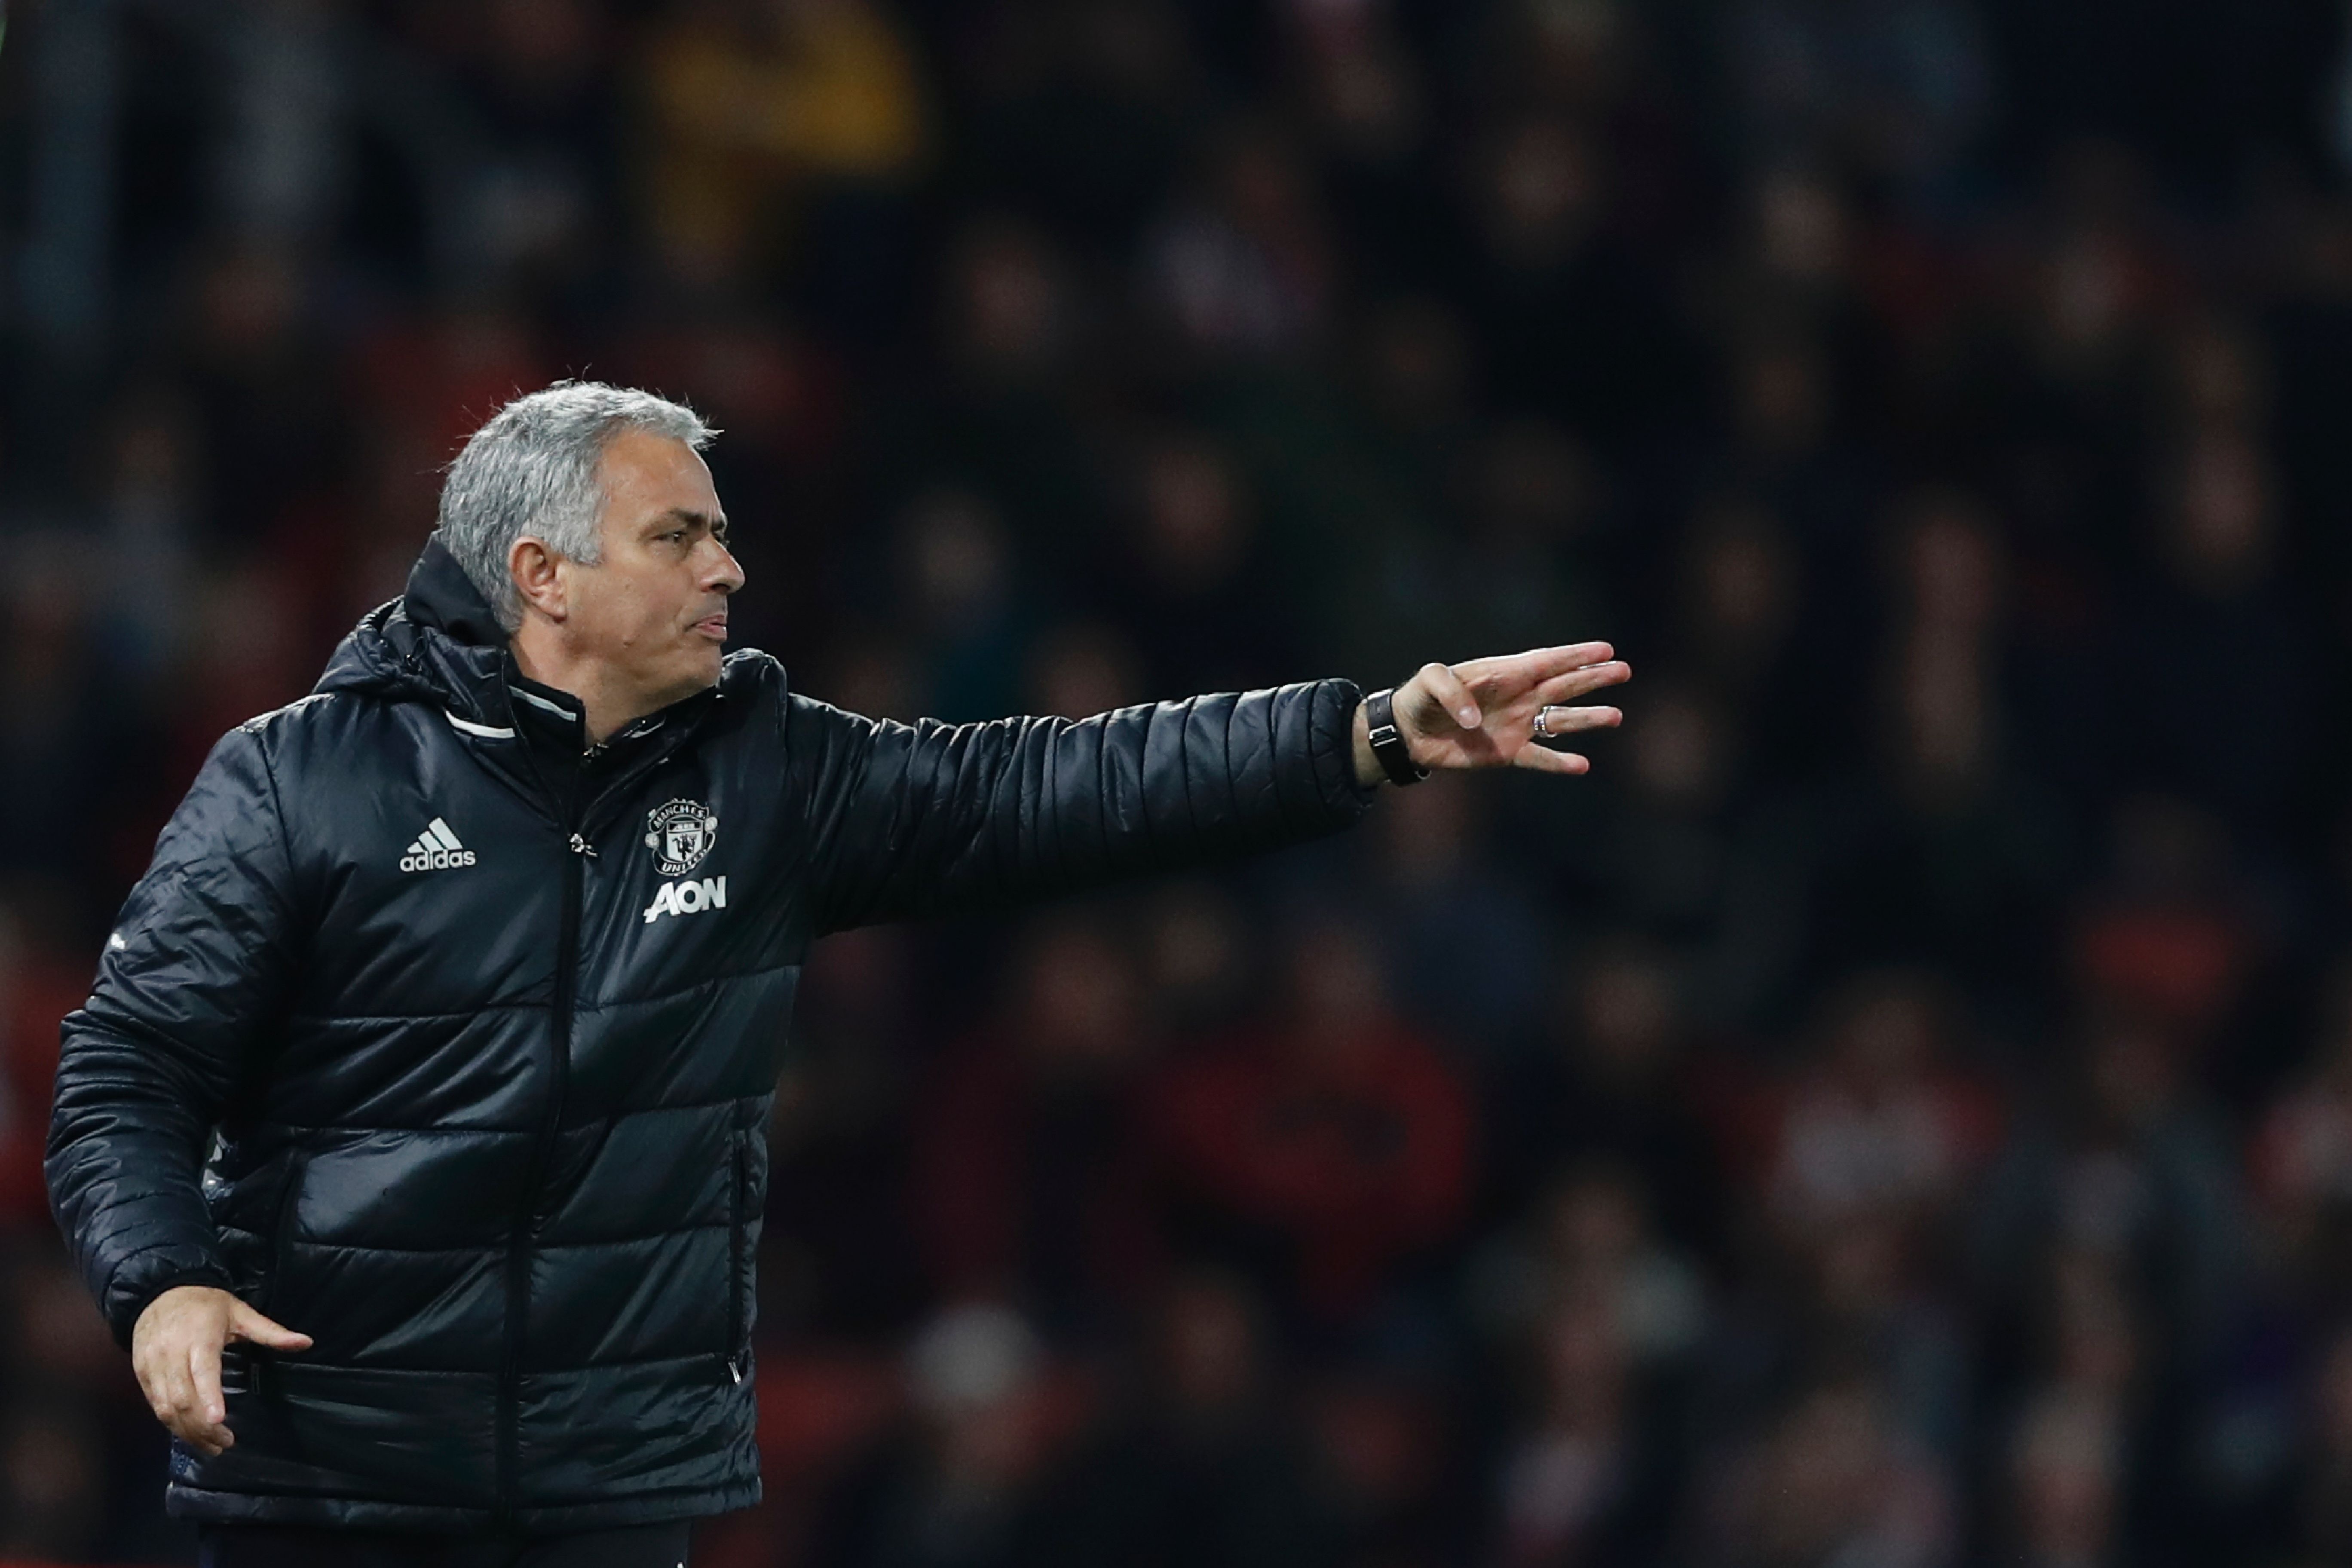 Manchester United's Portuguese manager Jose Mourinho gestures from the touchline during the English Premier League football match between Southampton and Manchester United at St Mary's Stadium in Southampton, southern England on May 17, 2017. / AFP PHOTO / Adrian DENNIS / RESTRICTED TO EDITORIAL USE. No use with unauthorized audio, video, data, fixture lists, club/league logos or 'live' services. Online in-match use limited to 75 images, no video emulation. No use in betting, games or single club/league/player publications.  /         (Photo credit should read ADRIAN DENNIS/AFP/Getty Images)